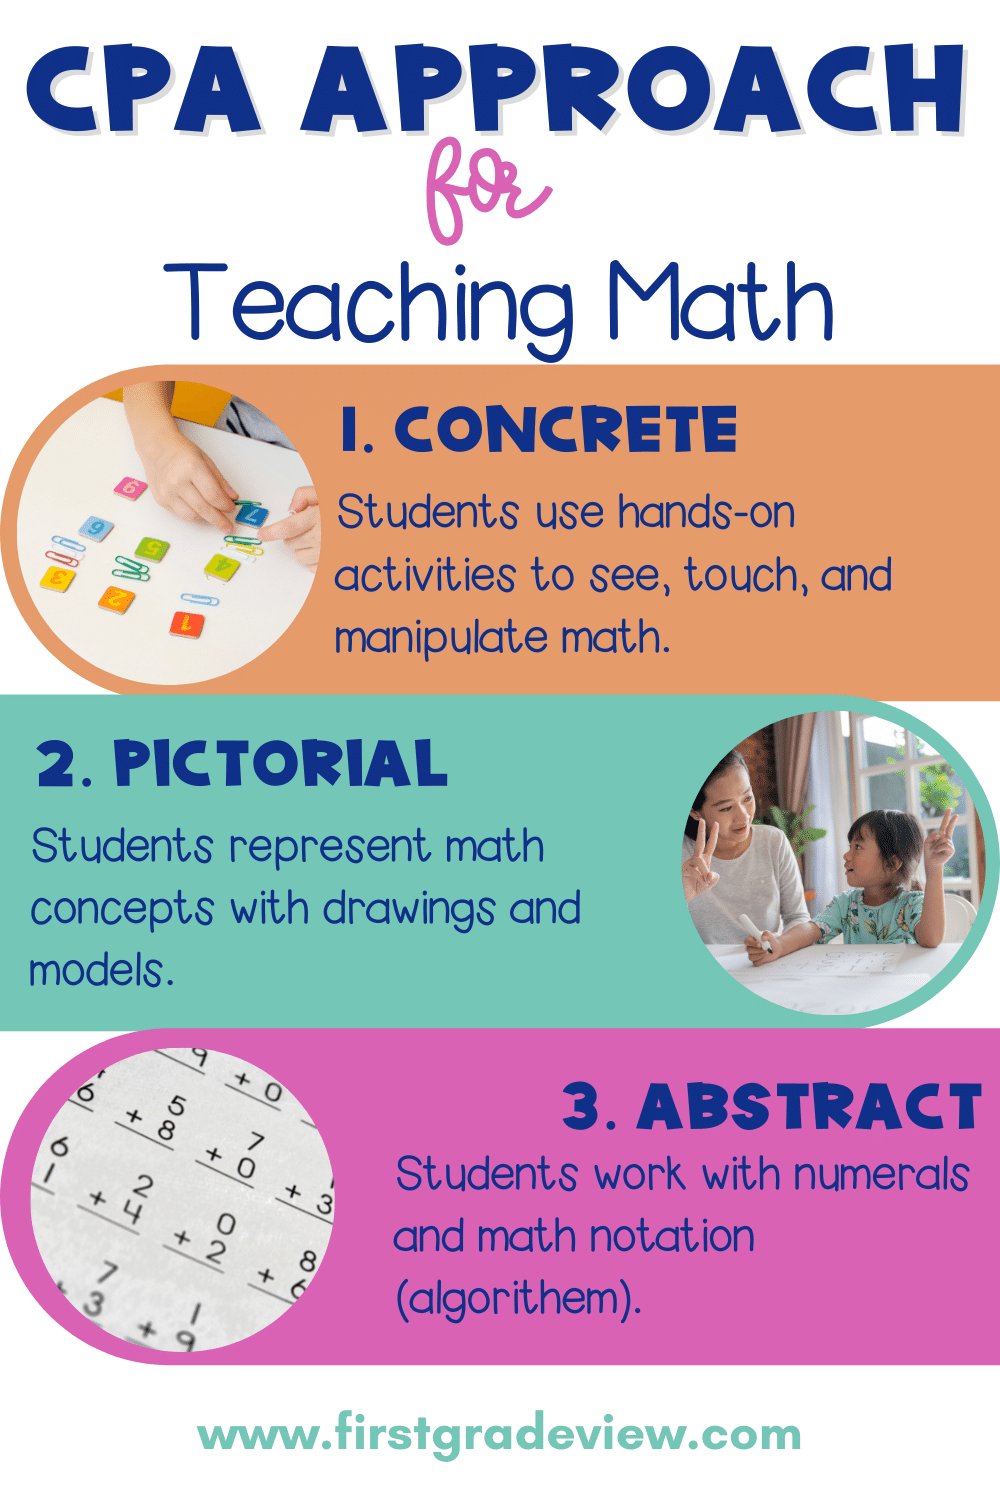 Infographic on concrete, pictorial, abstract approach in math